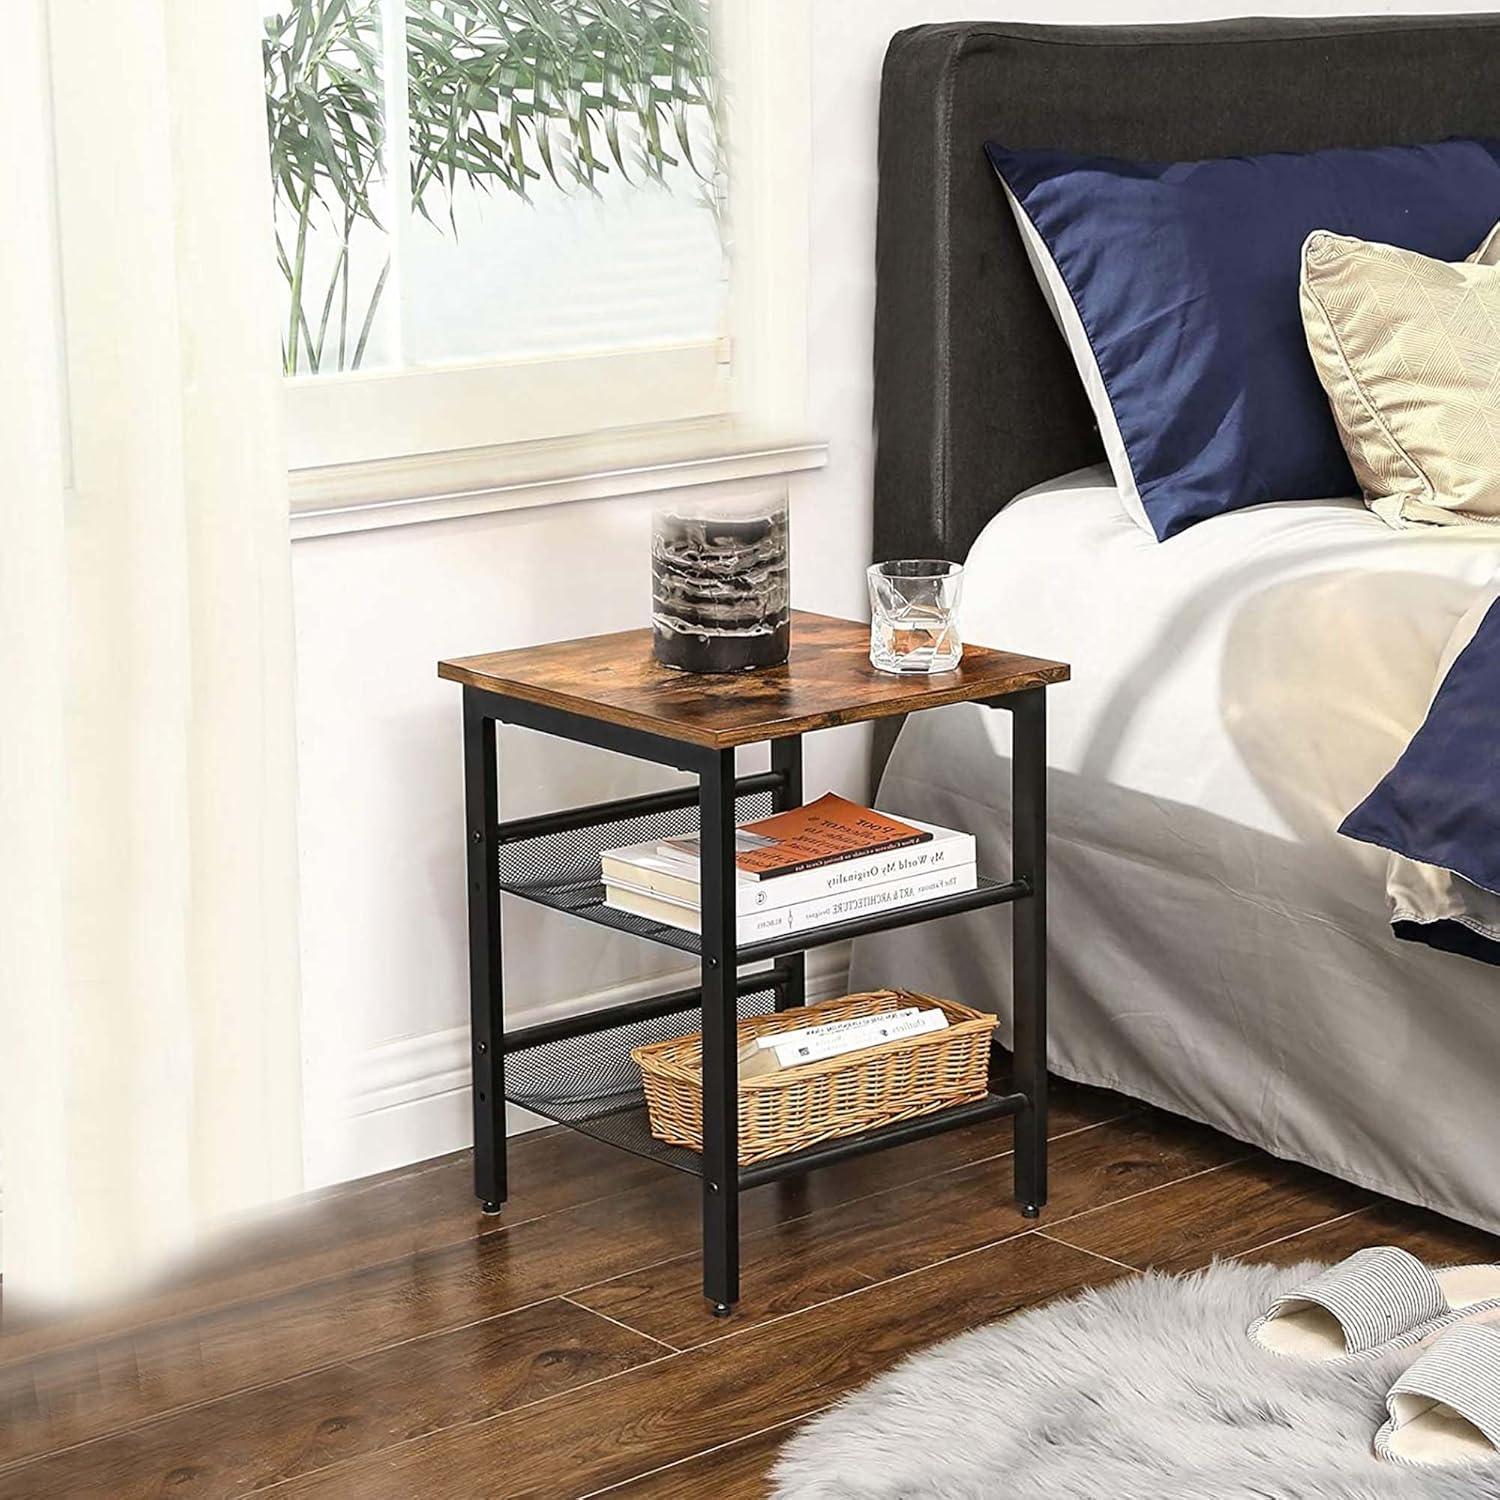 Rustic Brown and Black Iron Framed Nightstand with Wire Mesh Shelf